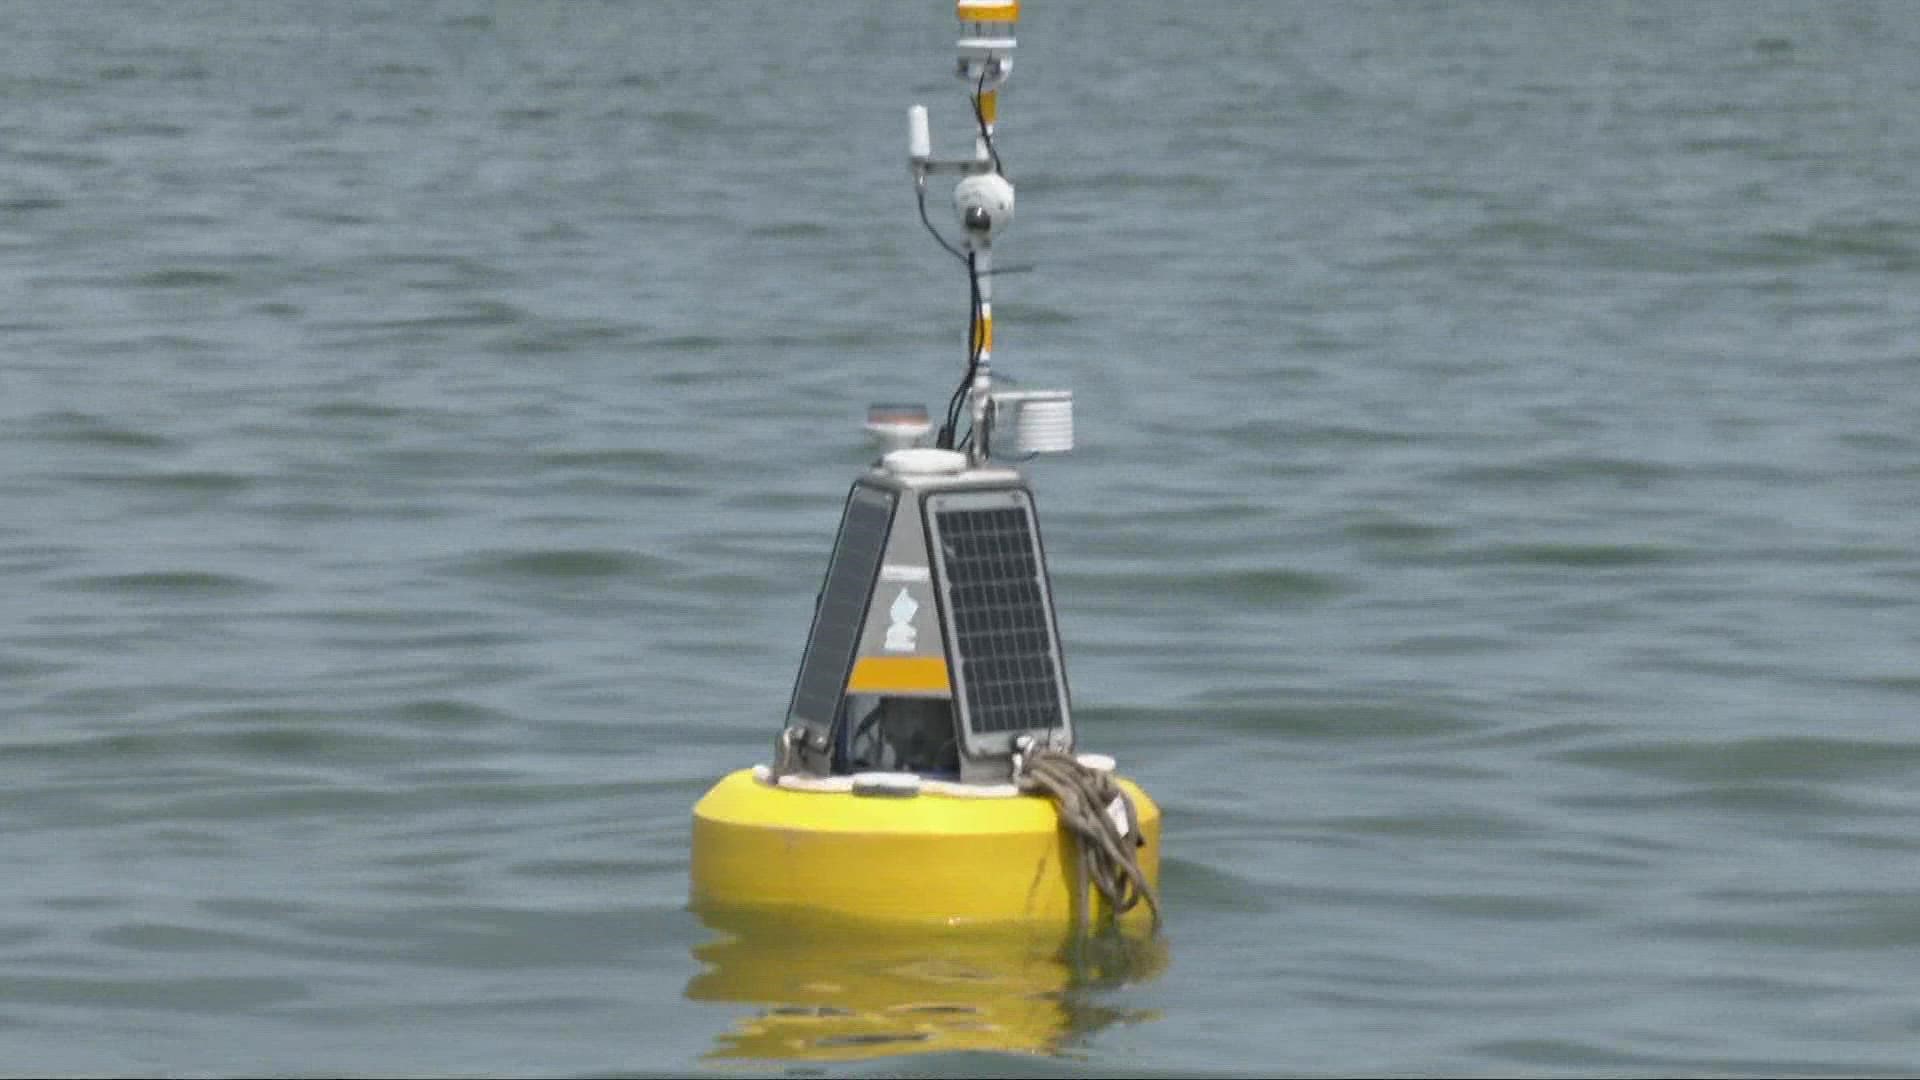 The four buoys protect the Lake Erie drinking water of 1.4 million Ohioans severed by Cleveland water.